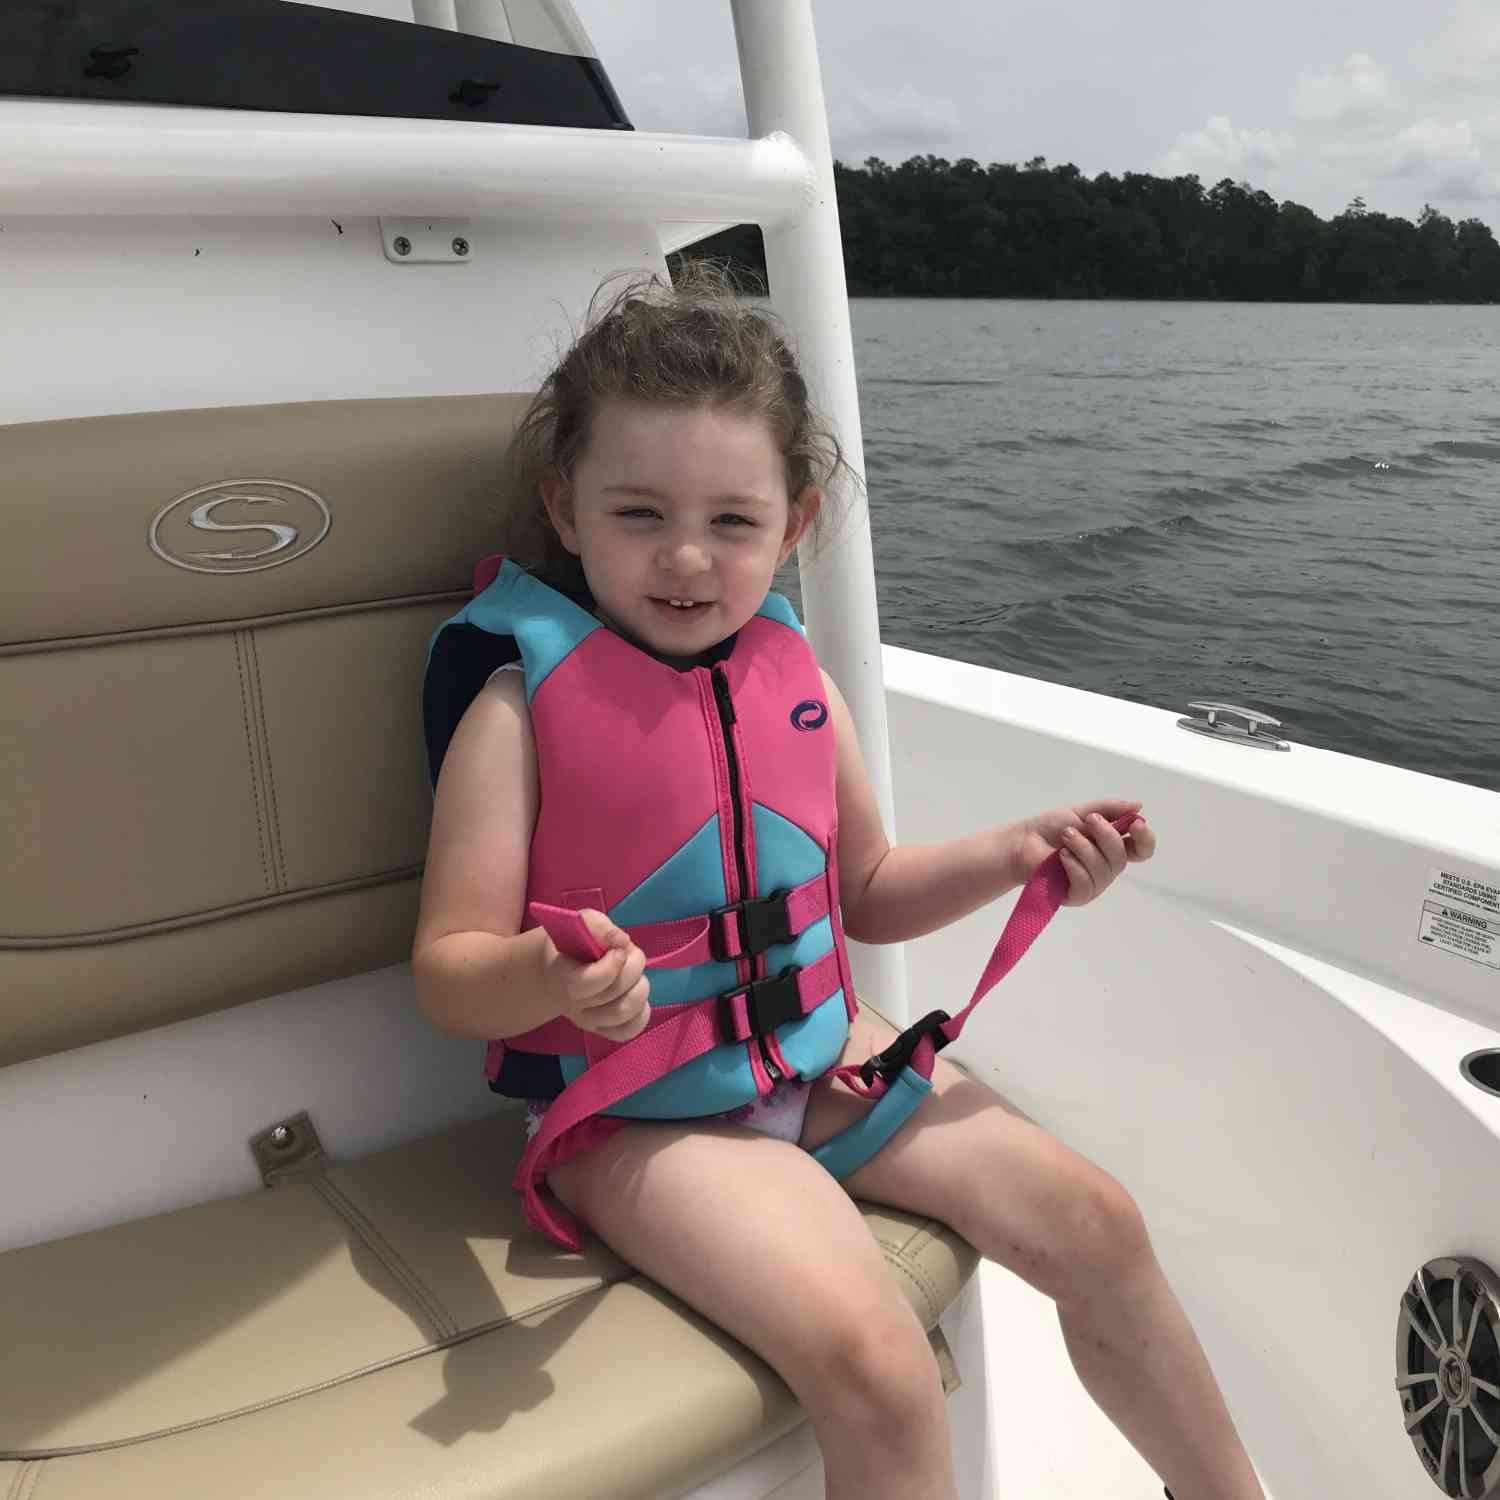 The granddaughter enjoying the view on the front seat of our Masters 227 Platinum Bay Boat